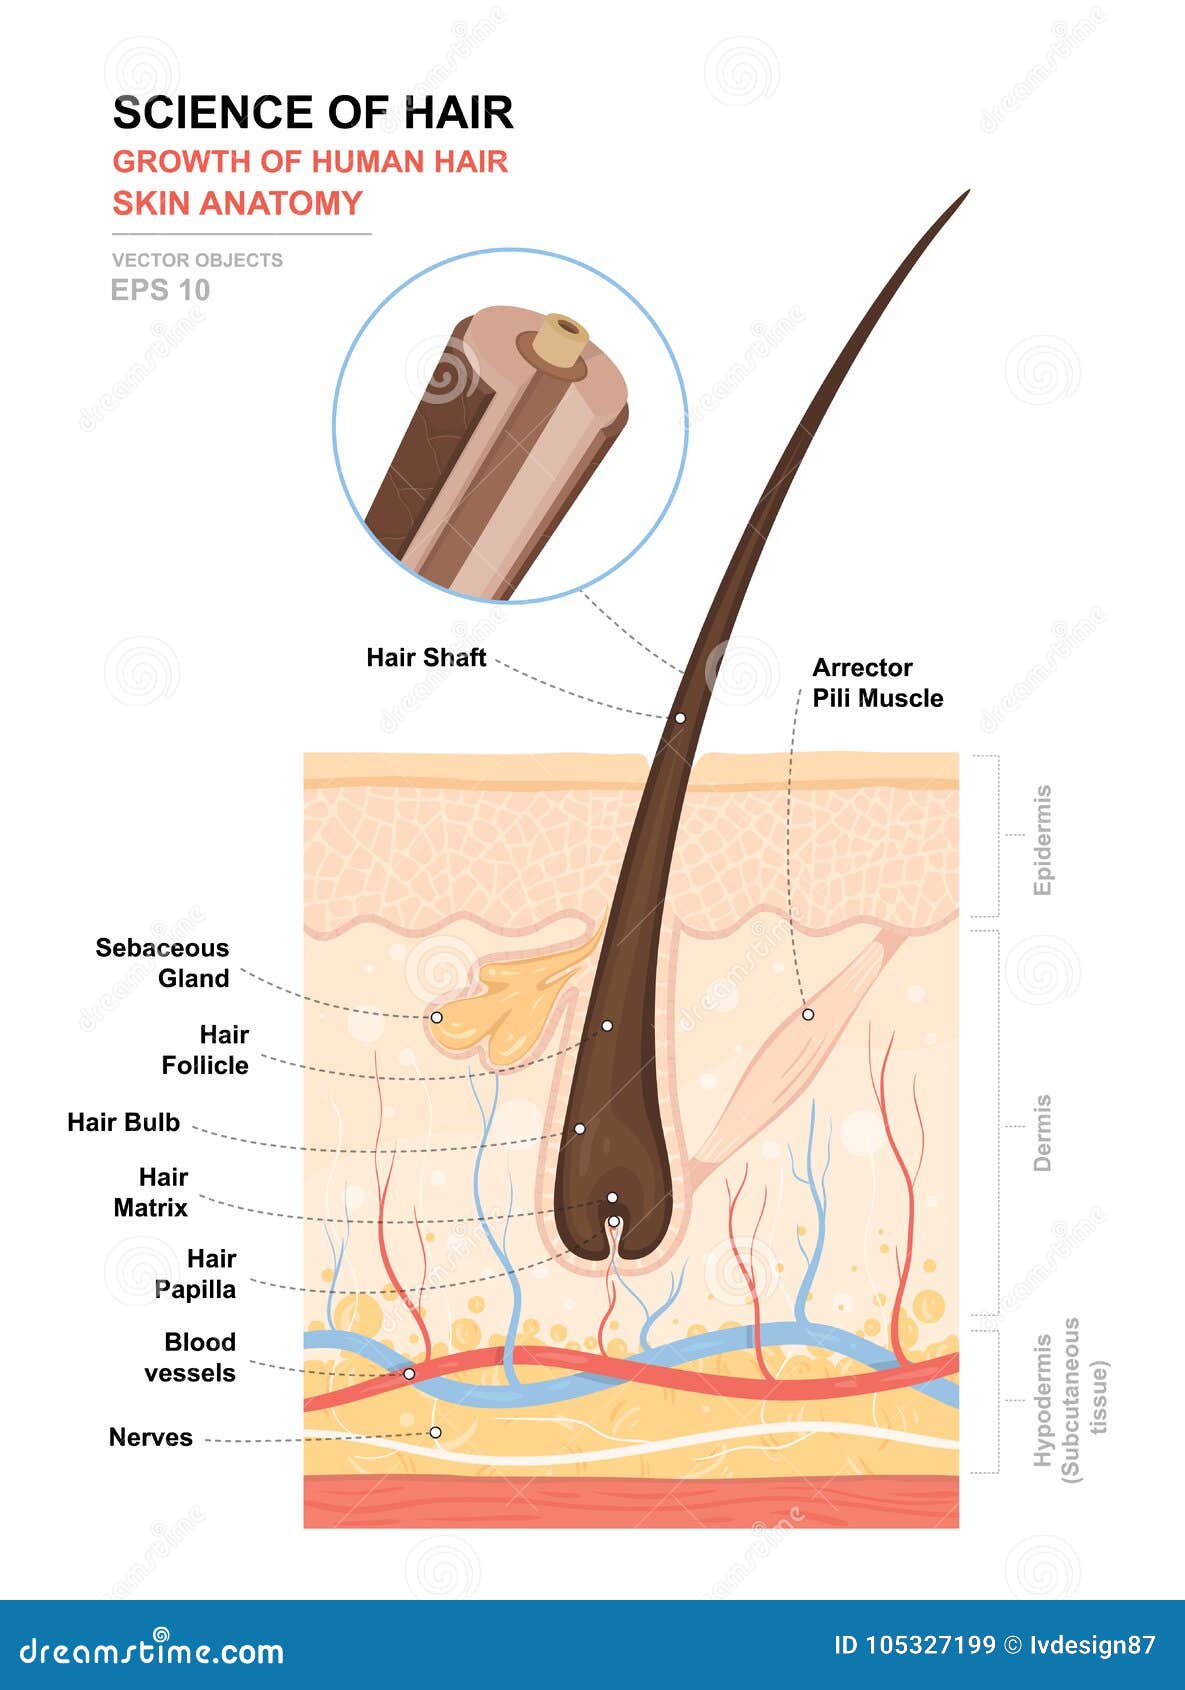 anatomical training poster. growth and structure of human hair. skin and hair anatomy. cross section of the skin layers